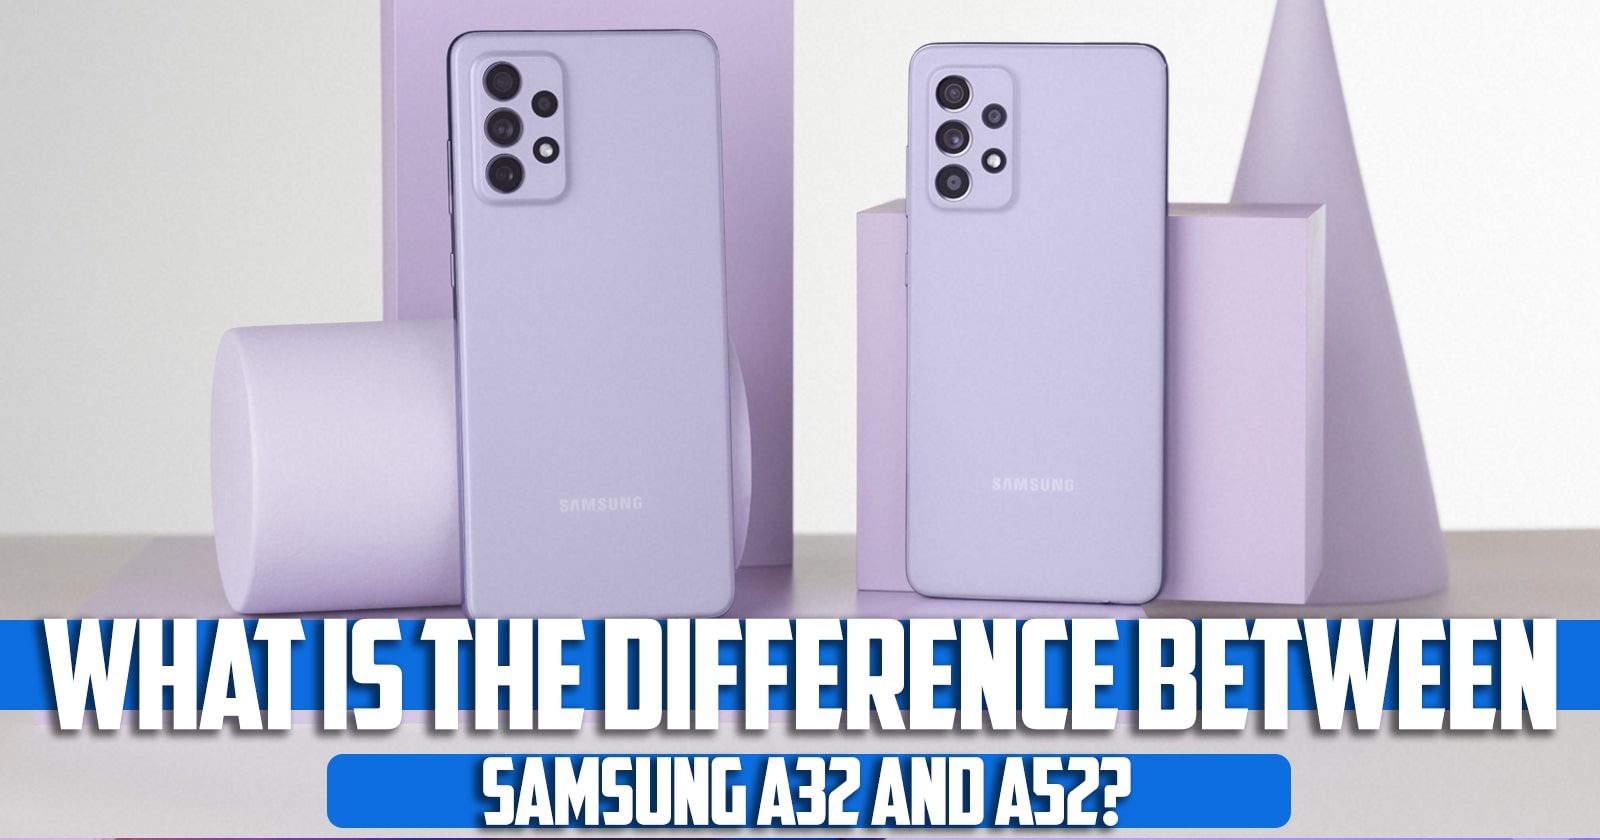 What is the difference between Samsung a32 and a52?